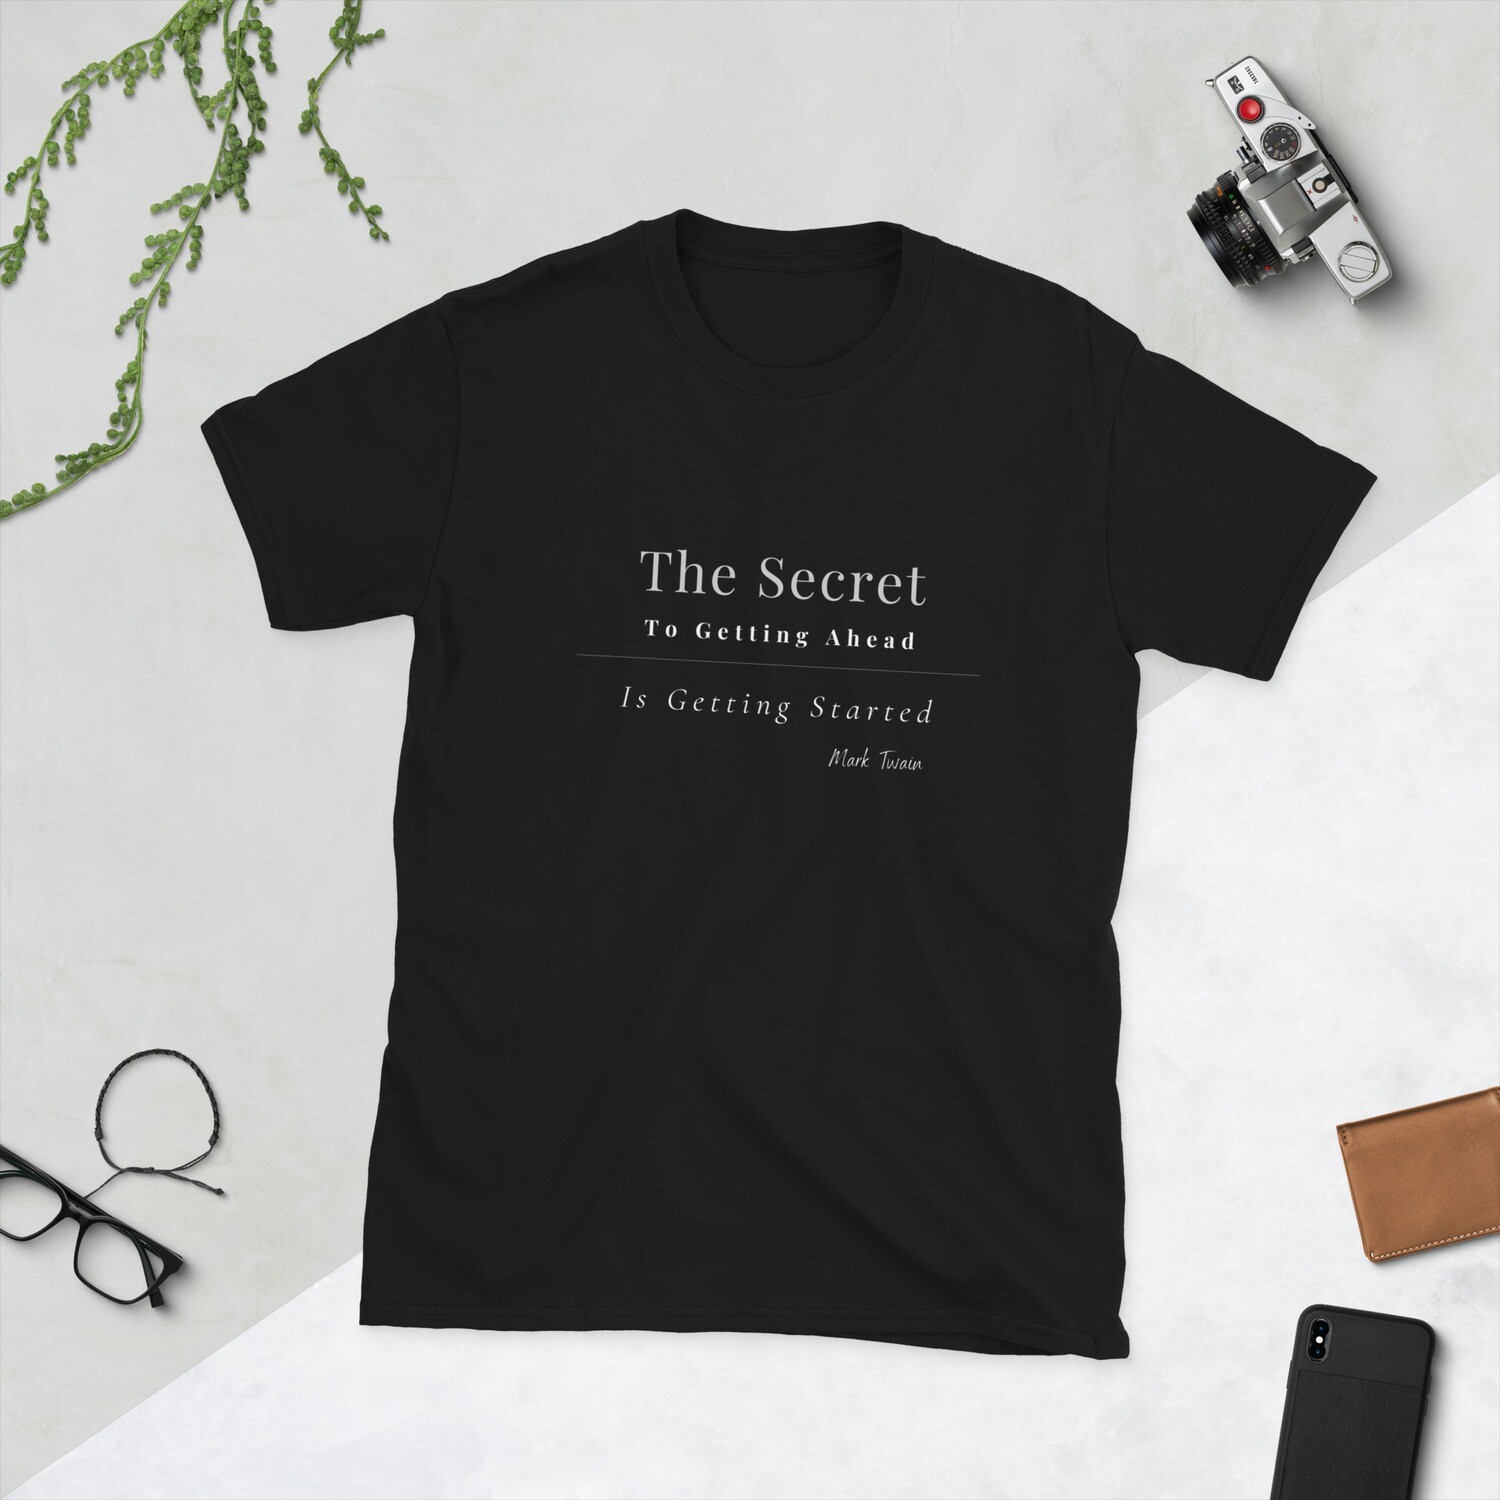 The Secret to Getting Ahead is Getting Started - Mark Twain Quote T-Shirt